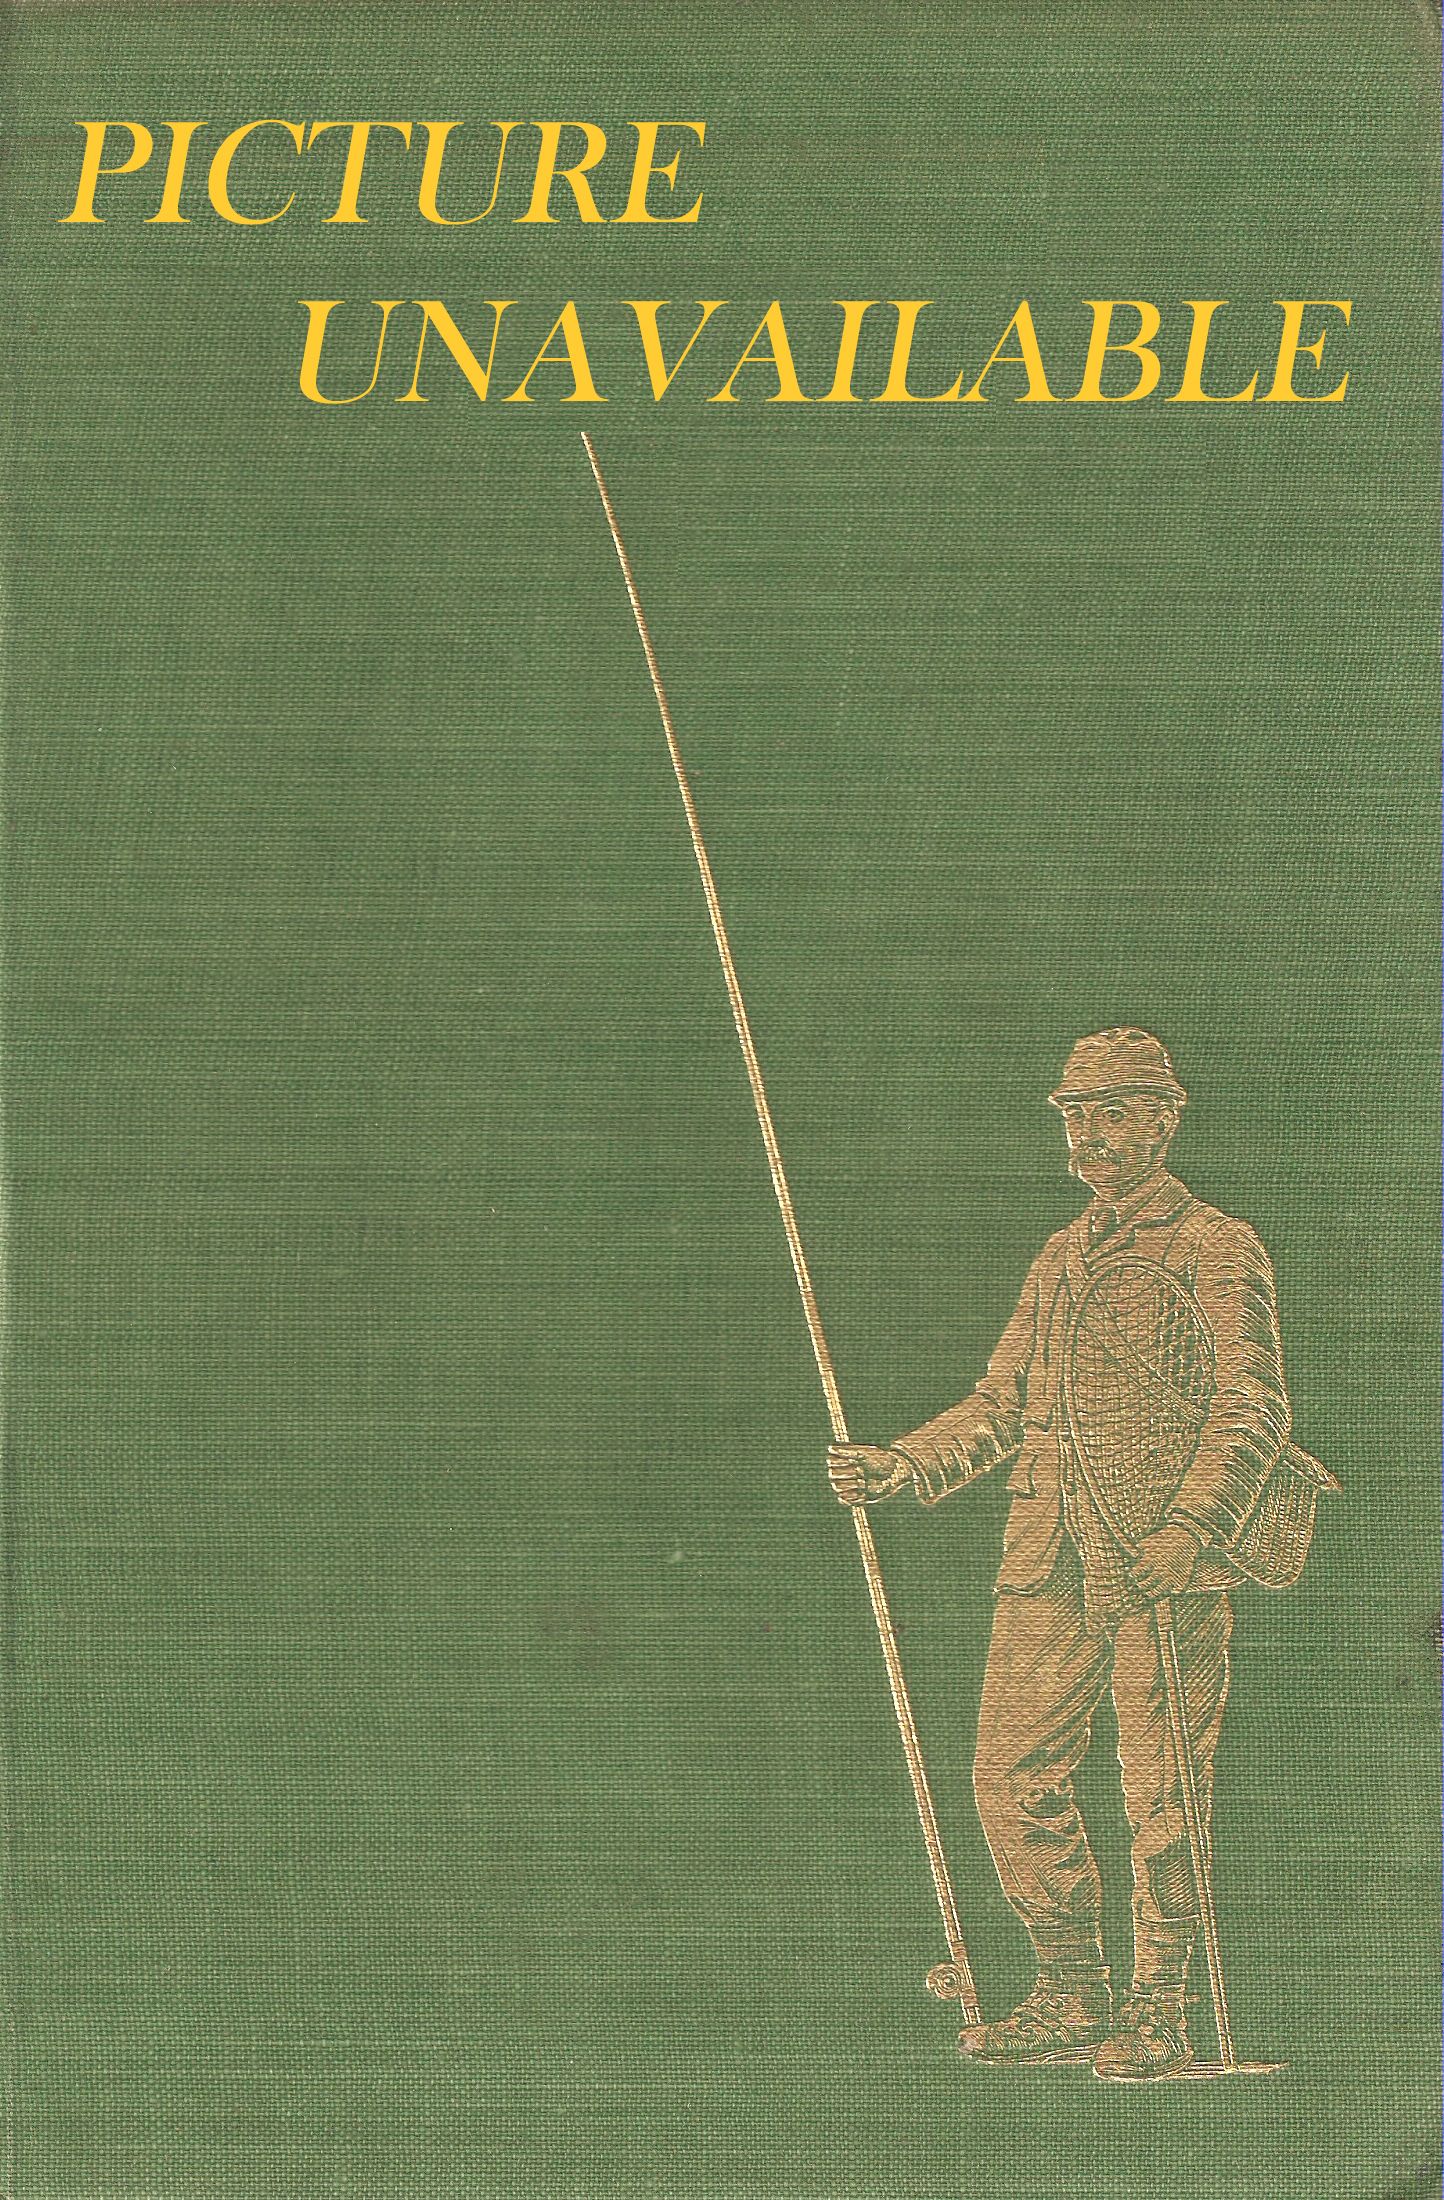 THE MAGIC WHEEL: AN ANTHOLOGY OF FISHING IN LITERATURE. Edited by David  Profumo and Graham Swift.